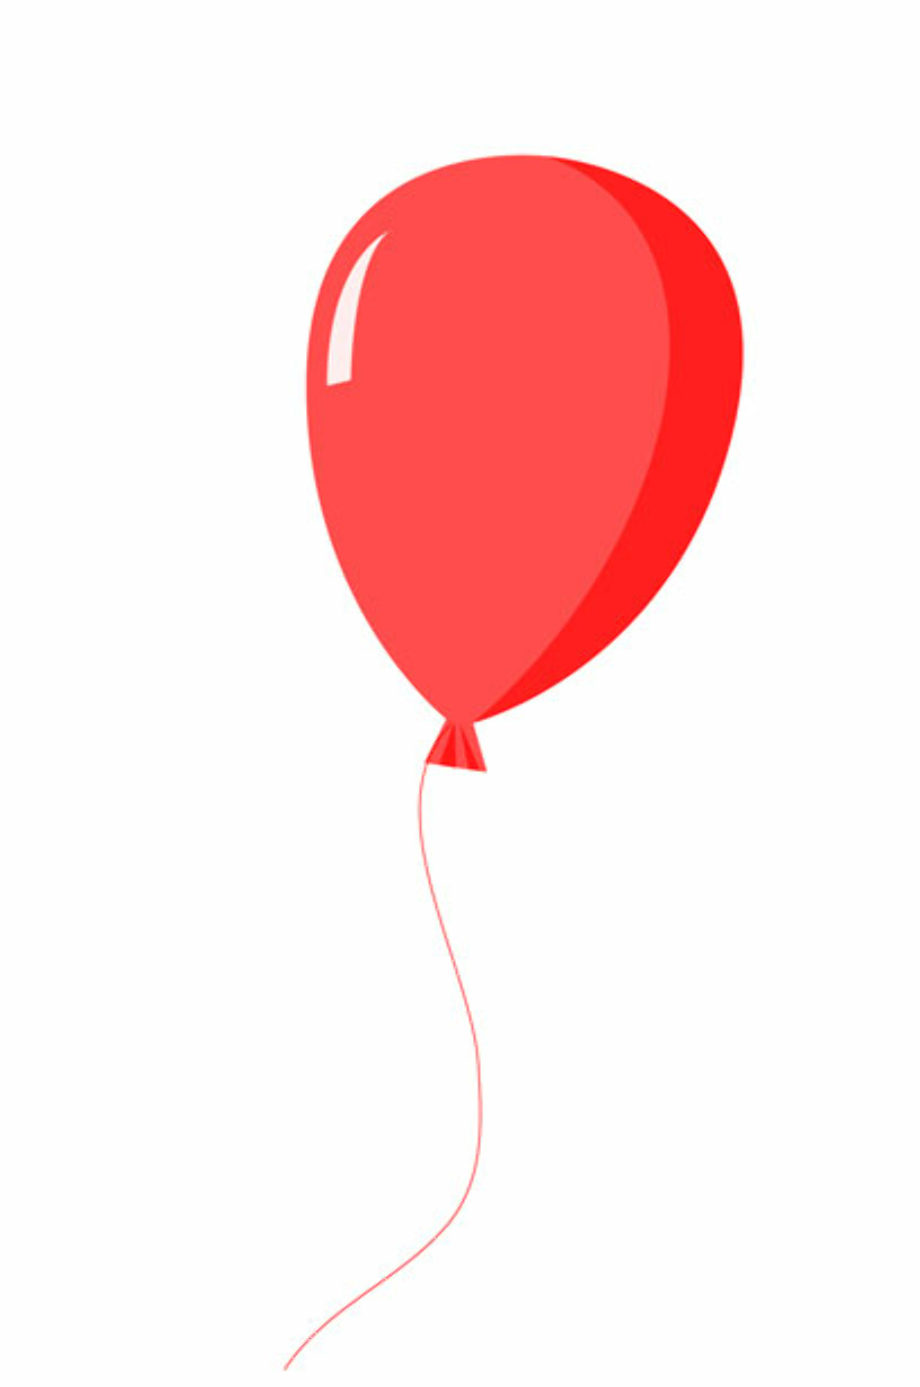 Balloon red